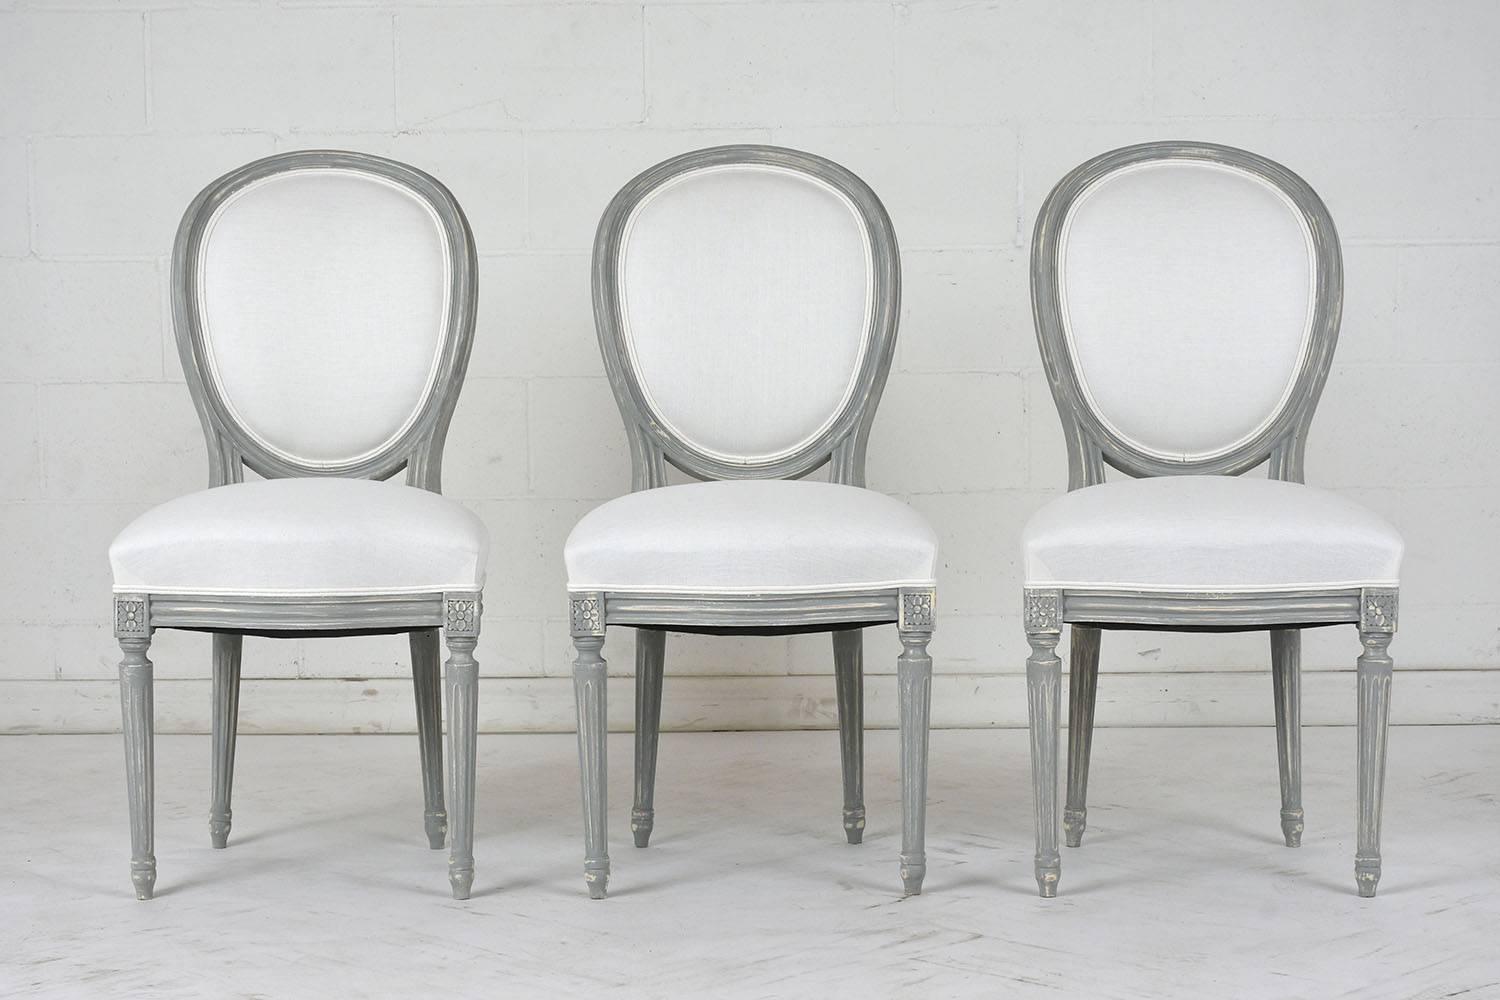 This set of six 1910s French Louis XVI-style dining chairs have a curved oval back and carved walnut wood frame finished in a pale grey and off-white color combination with a distressed finish. The frame has fluting and rosette carved details